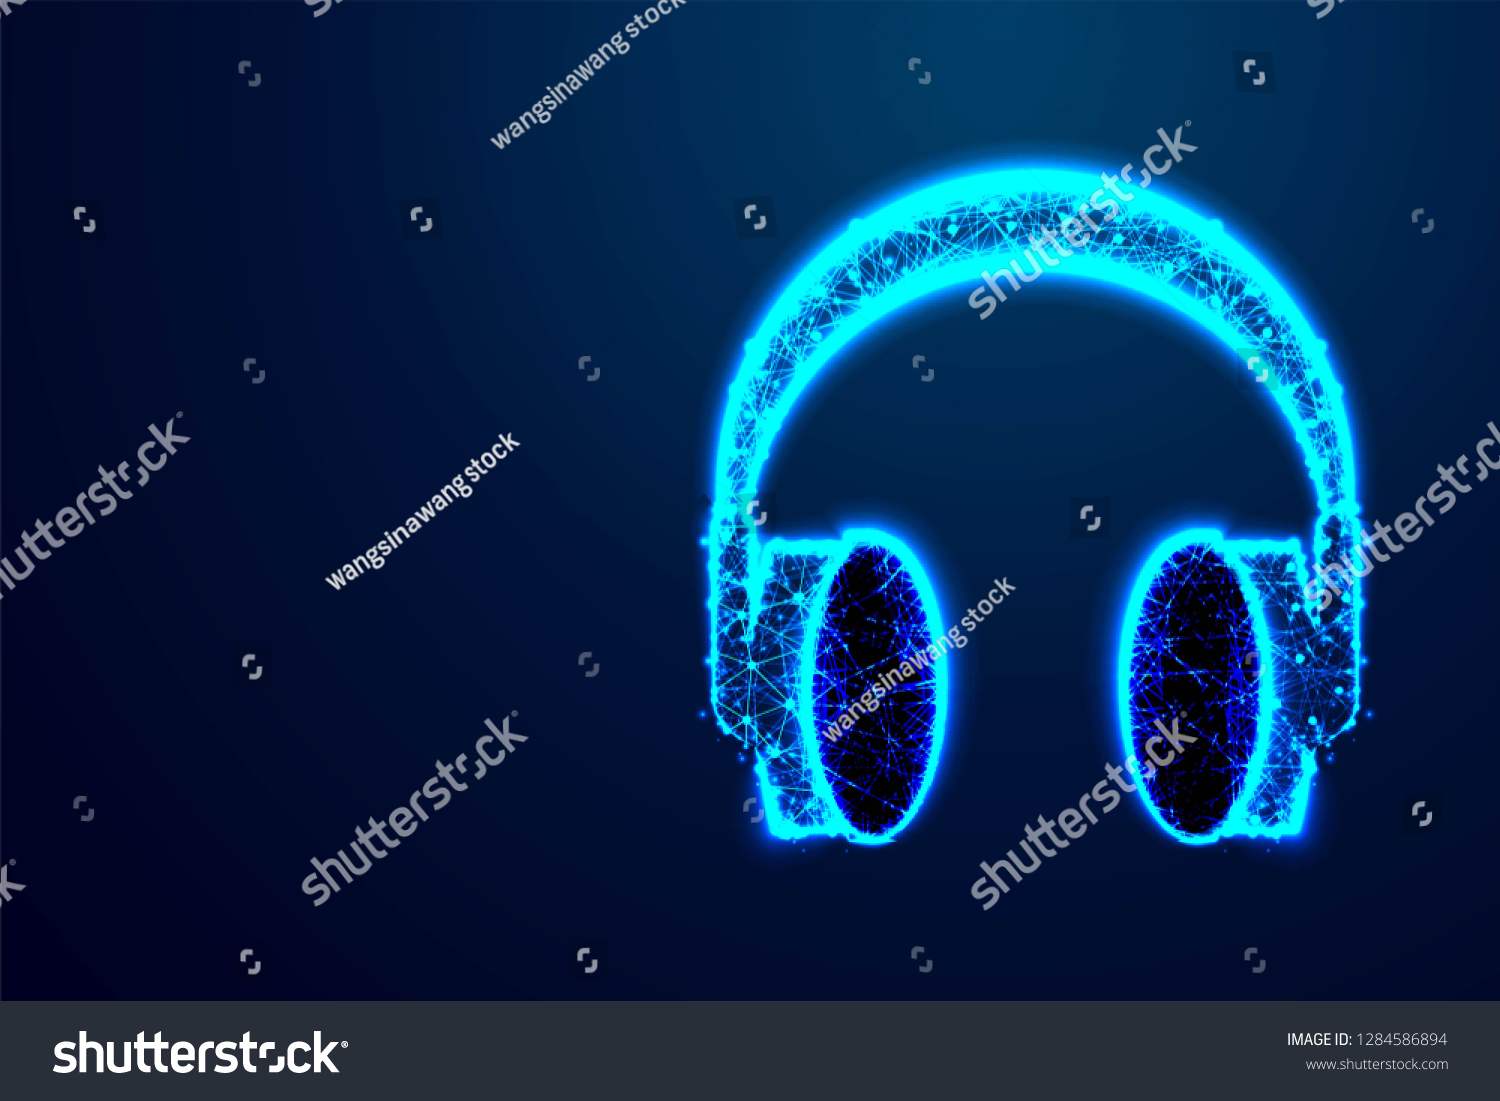 SVG of Headphone for support or service. Abstract low poly wireframe design. Vector illustration svg